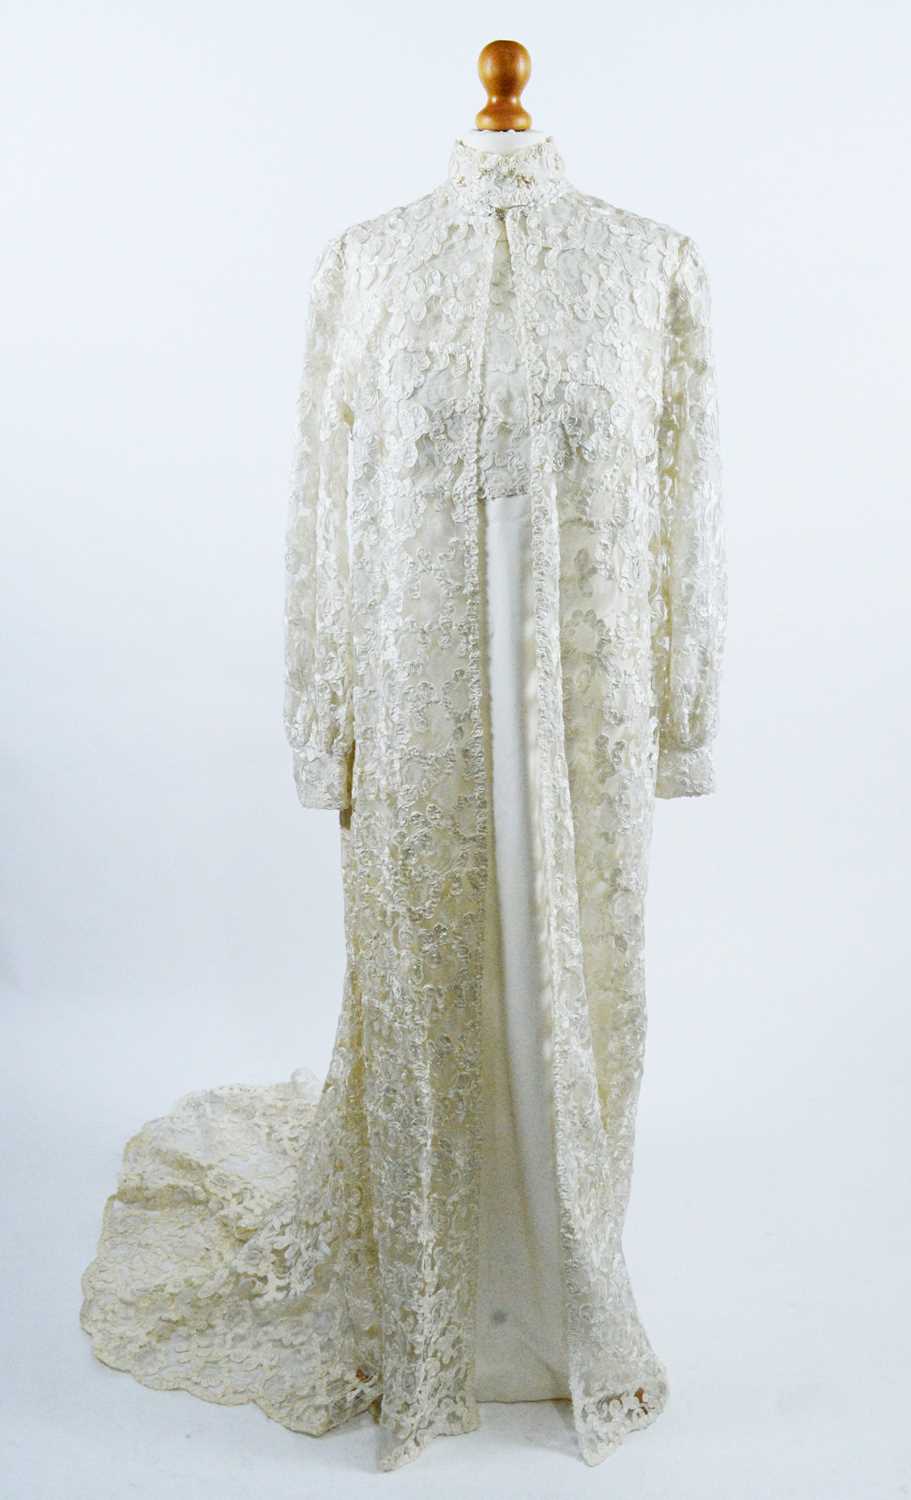 1960s two-piece champagne satin and lace wedding dress - Image 2 of 5